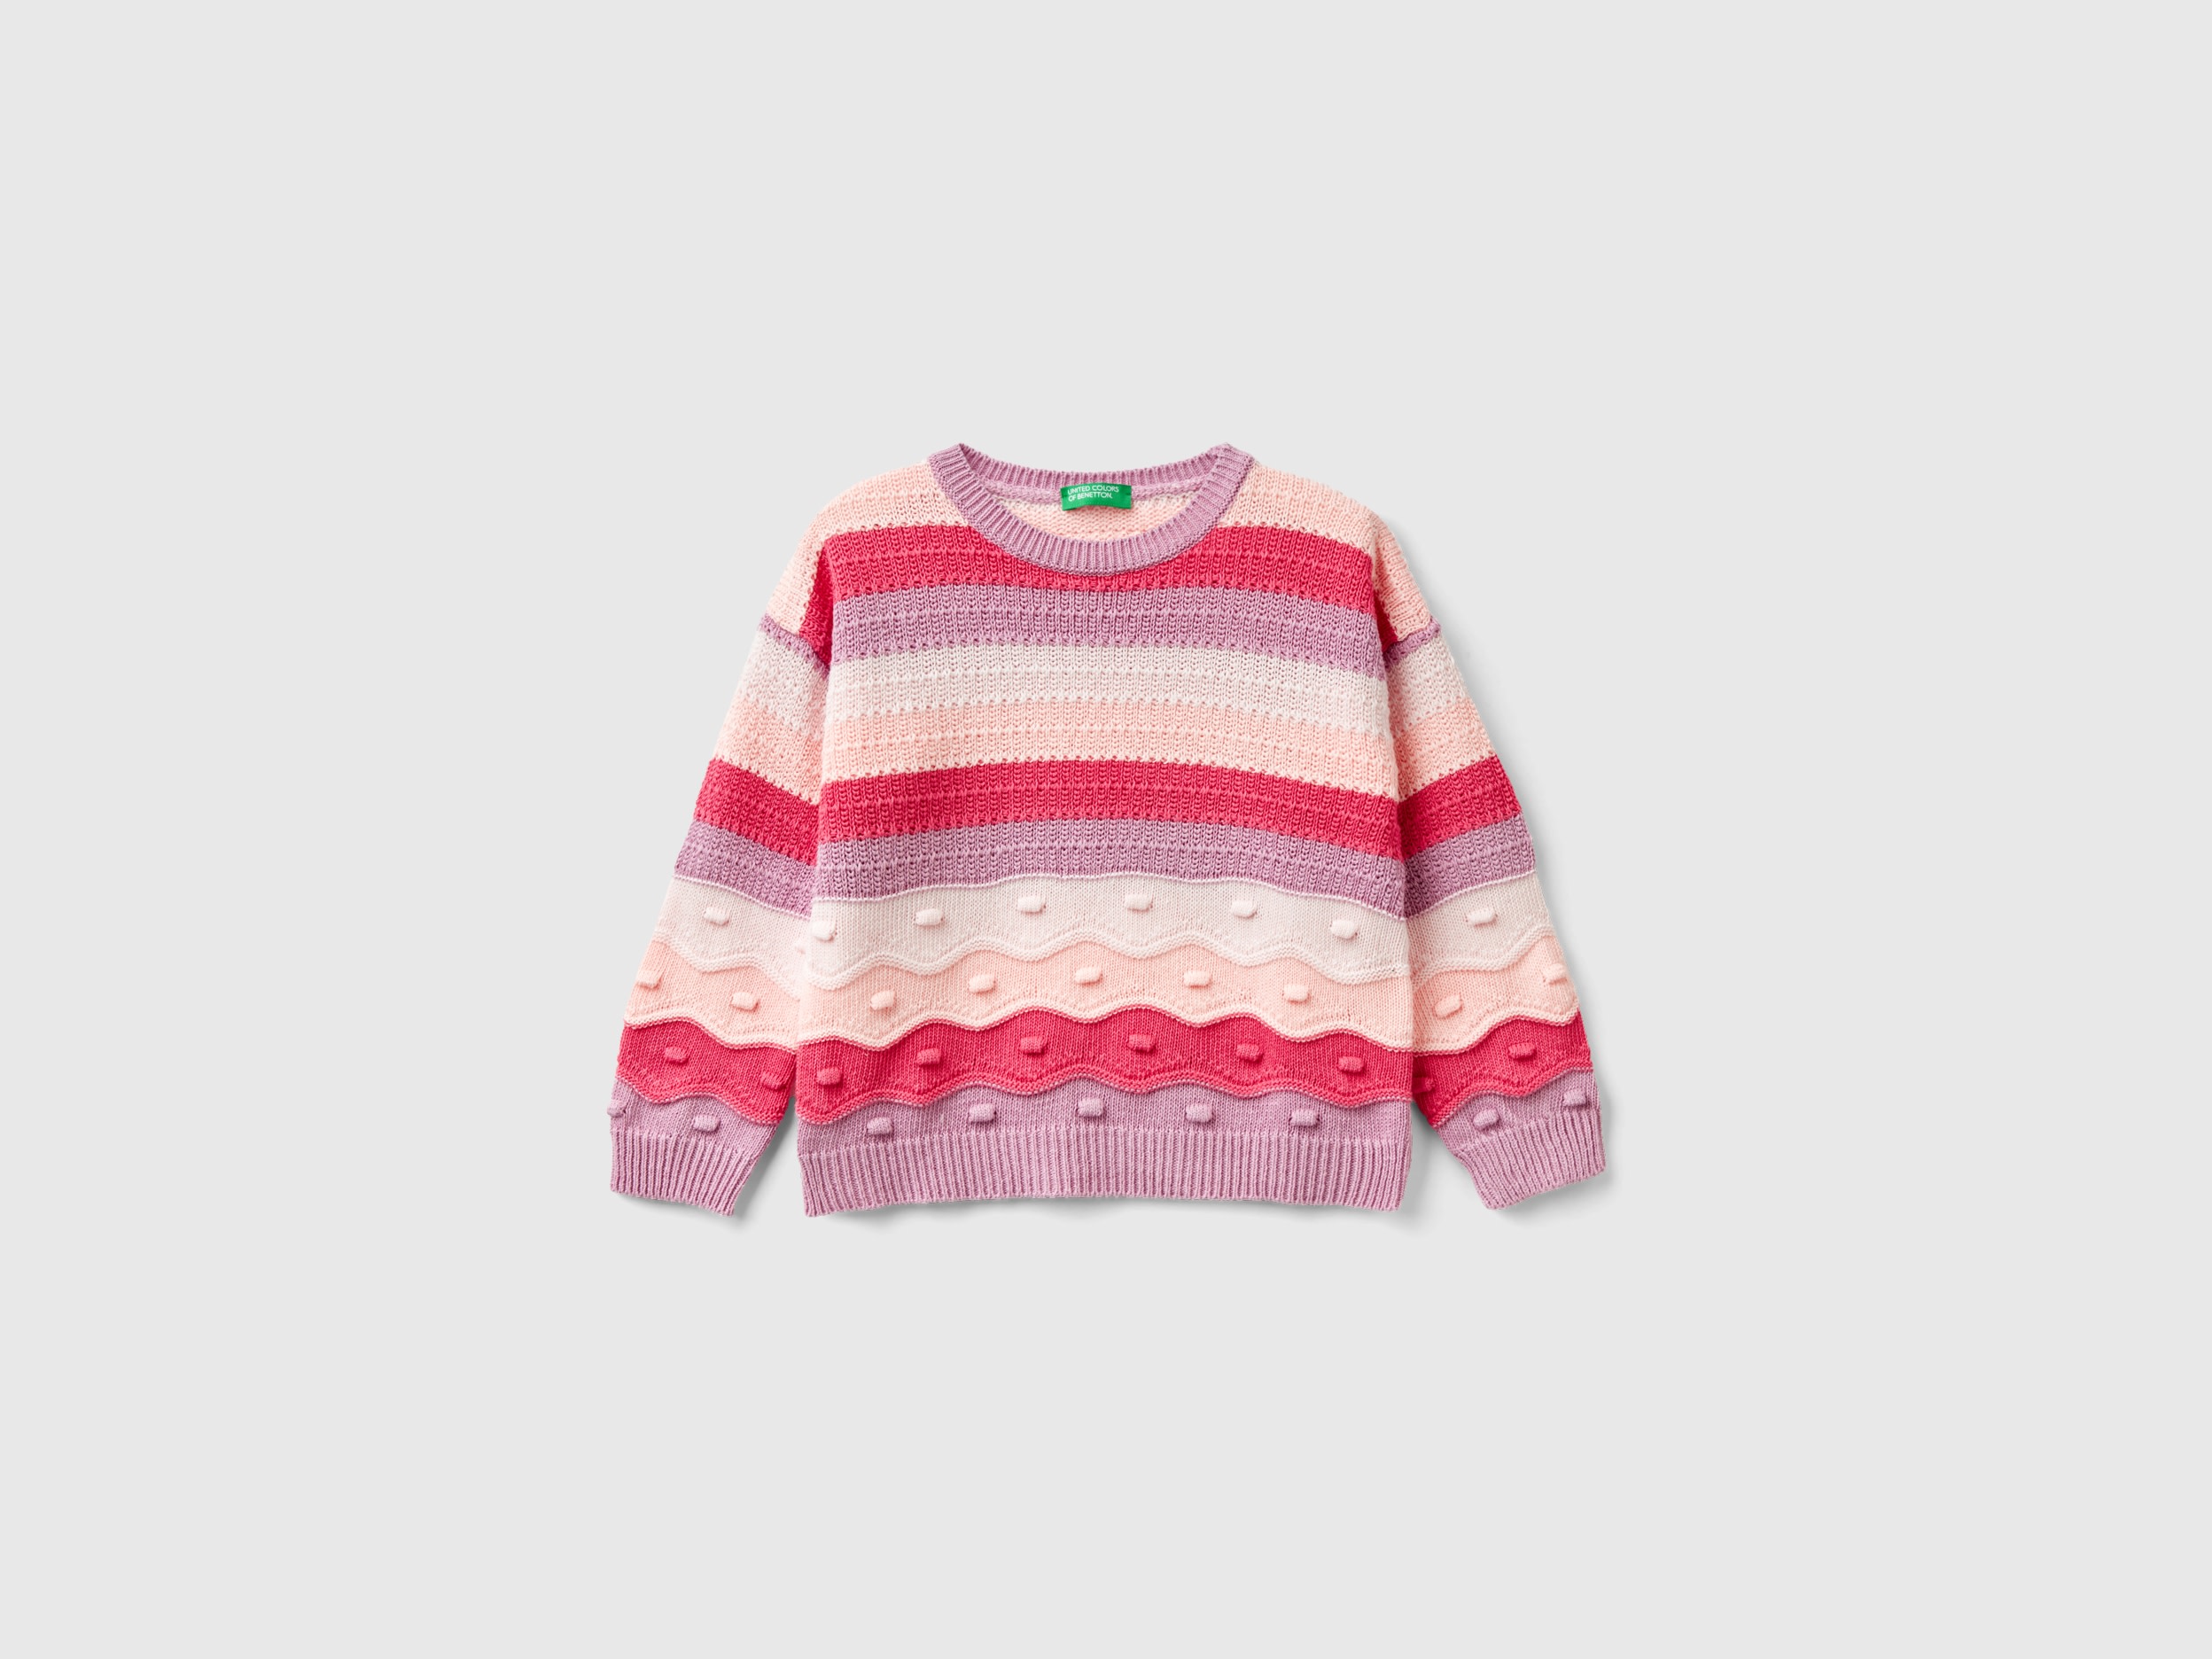 Image of Benetton, Striped Sweater In Recycled Cotton Blend, size 104, Multi-color, Kids